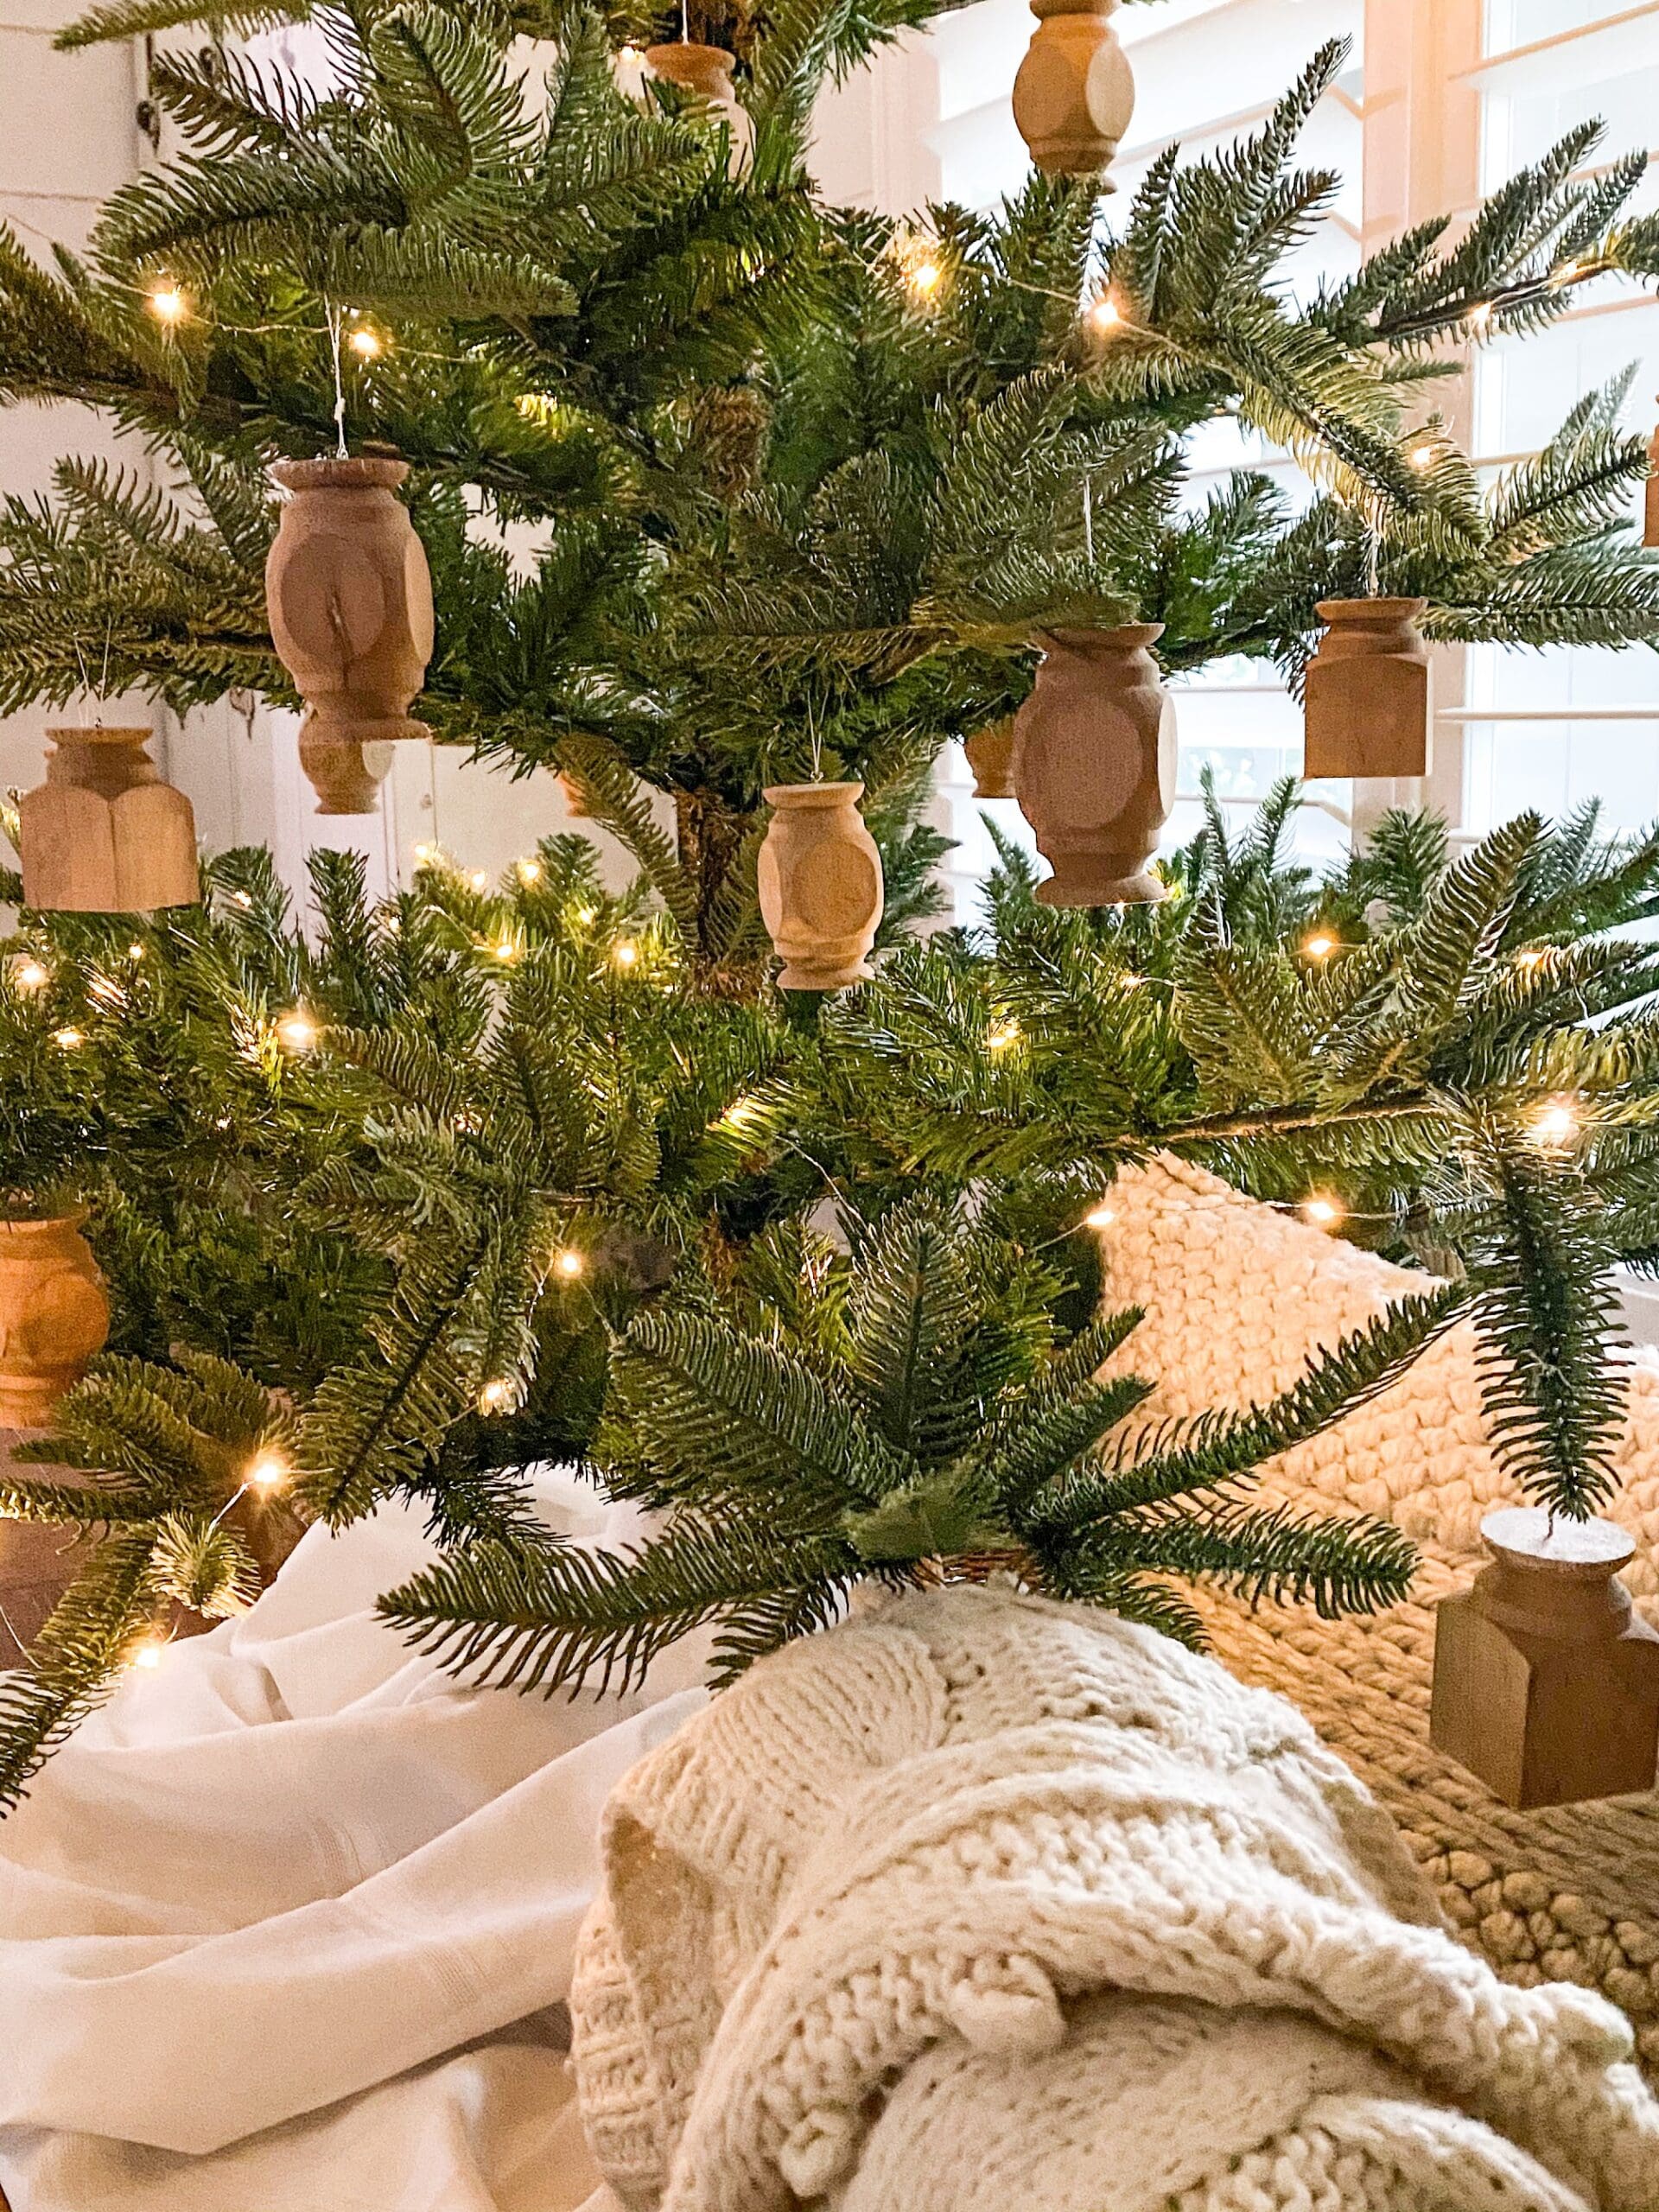 DIY wooden spindles cut up to make ornaments